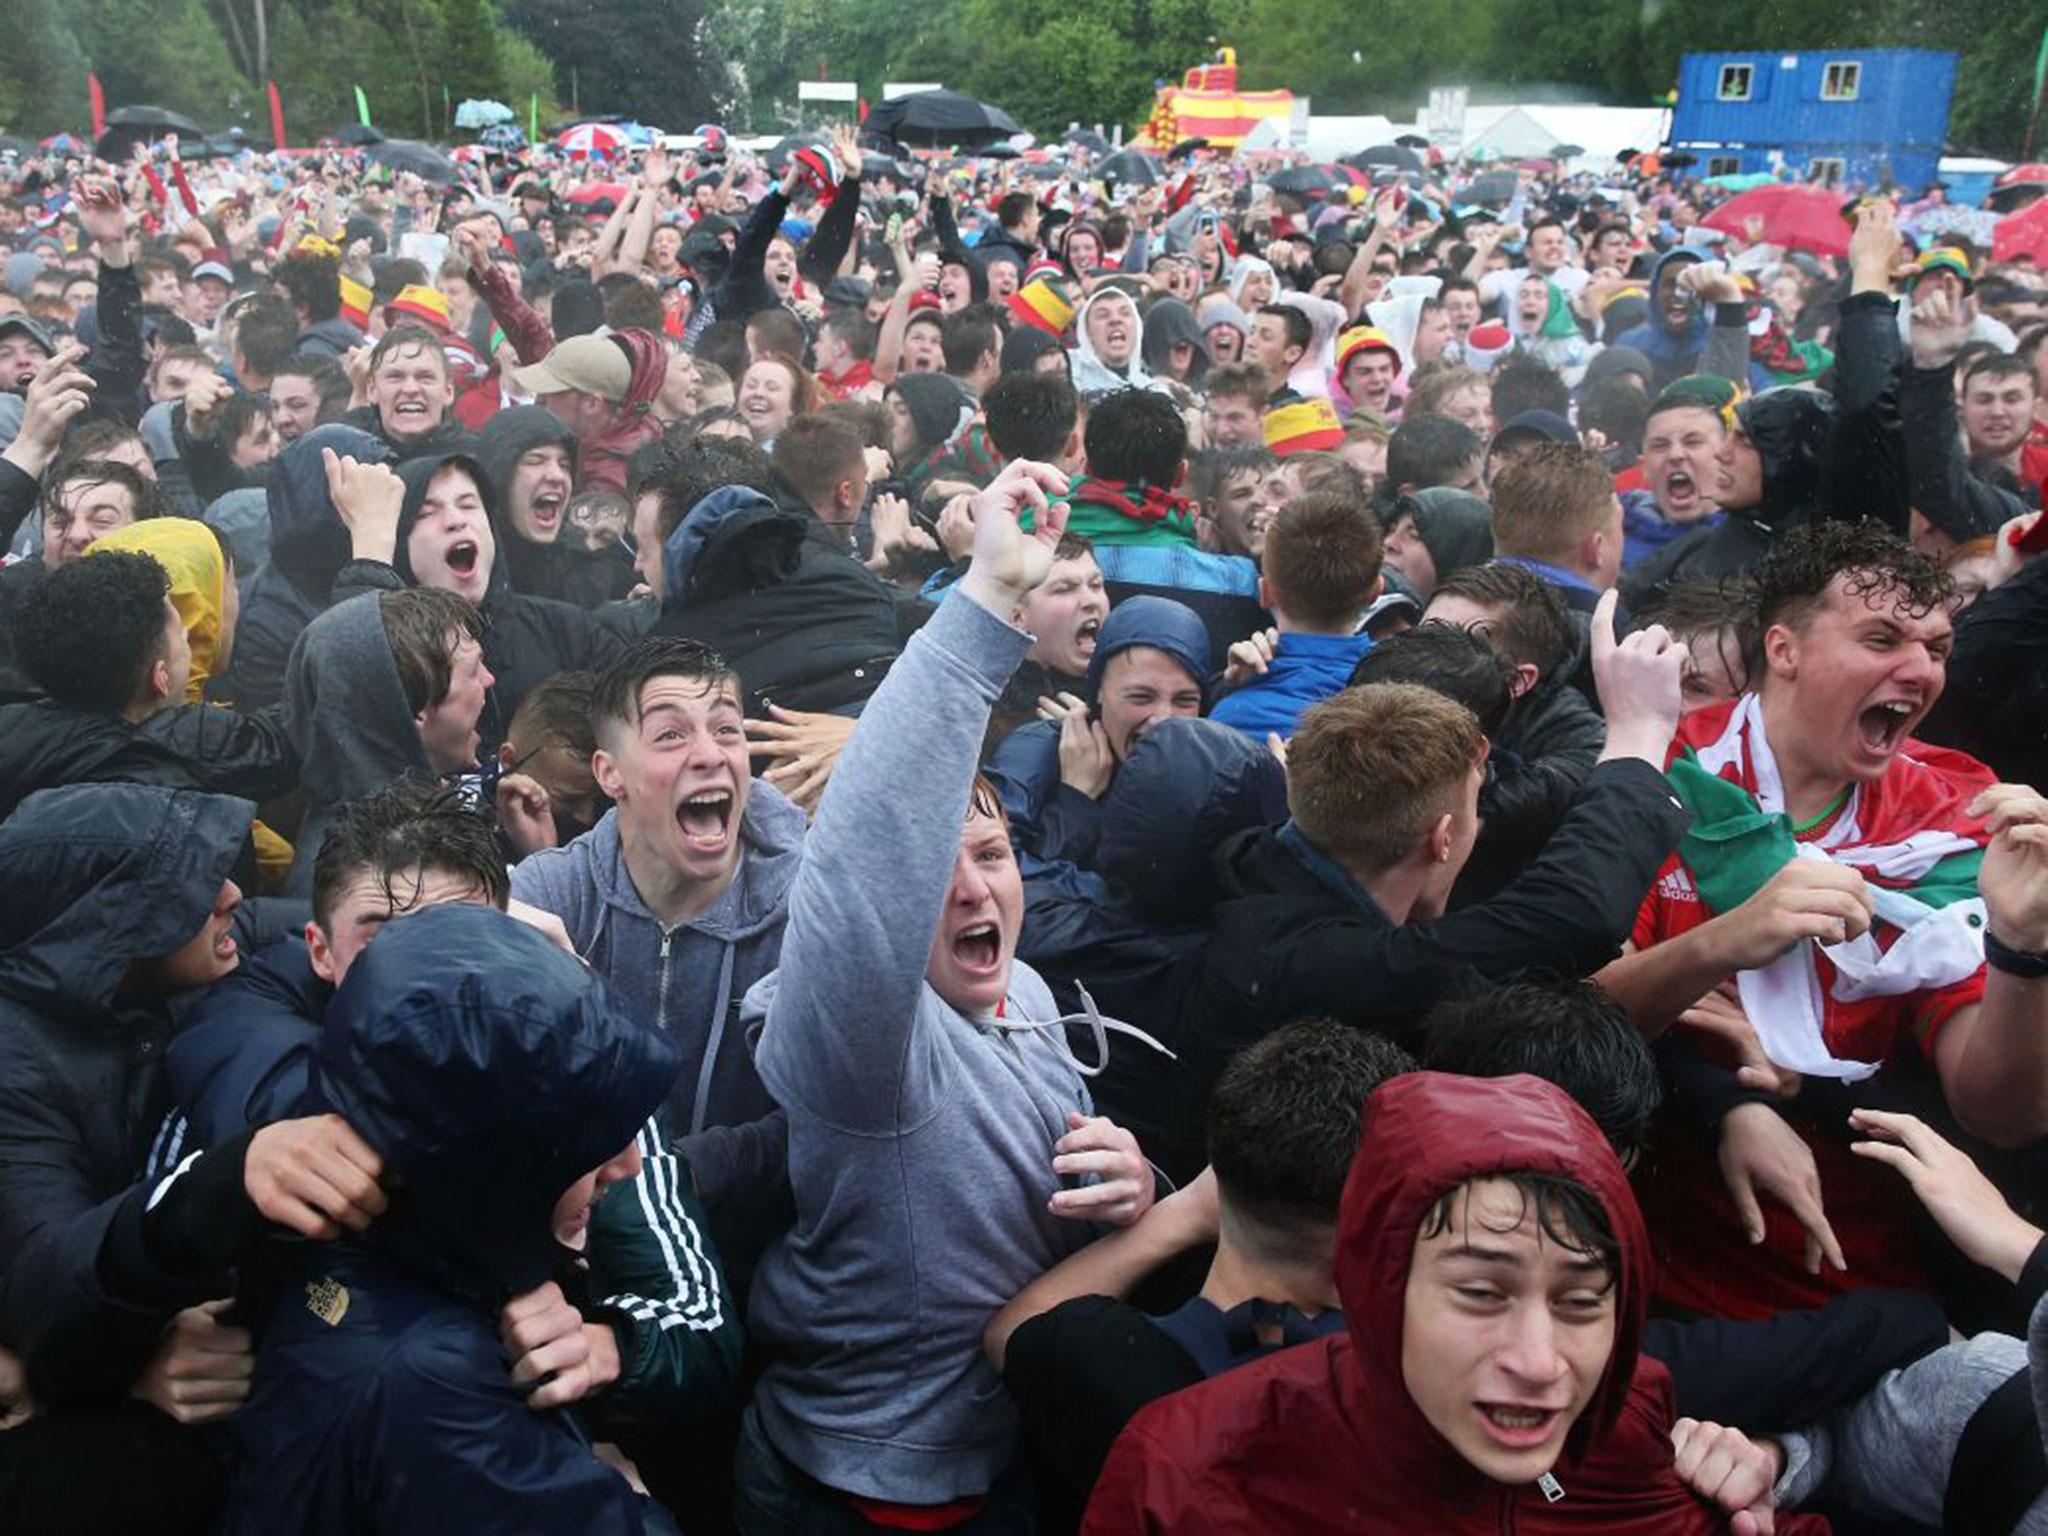 Welsh fans celebrate after Gareth Bale scores the first goal at the Cardiff Fanzone in Bute Park on June 16